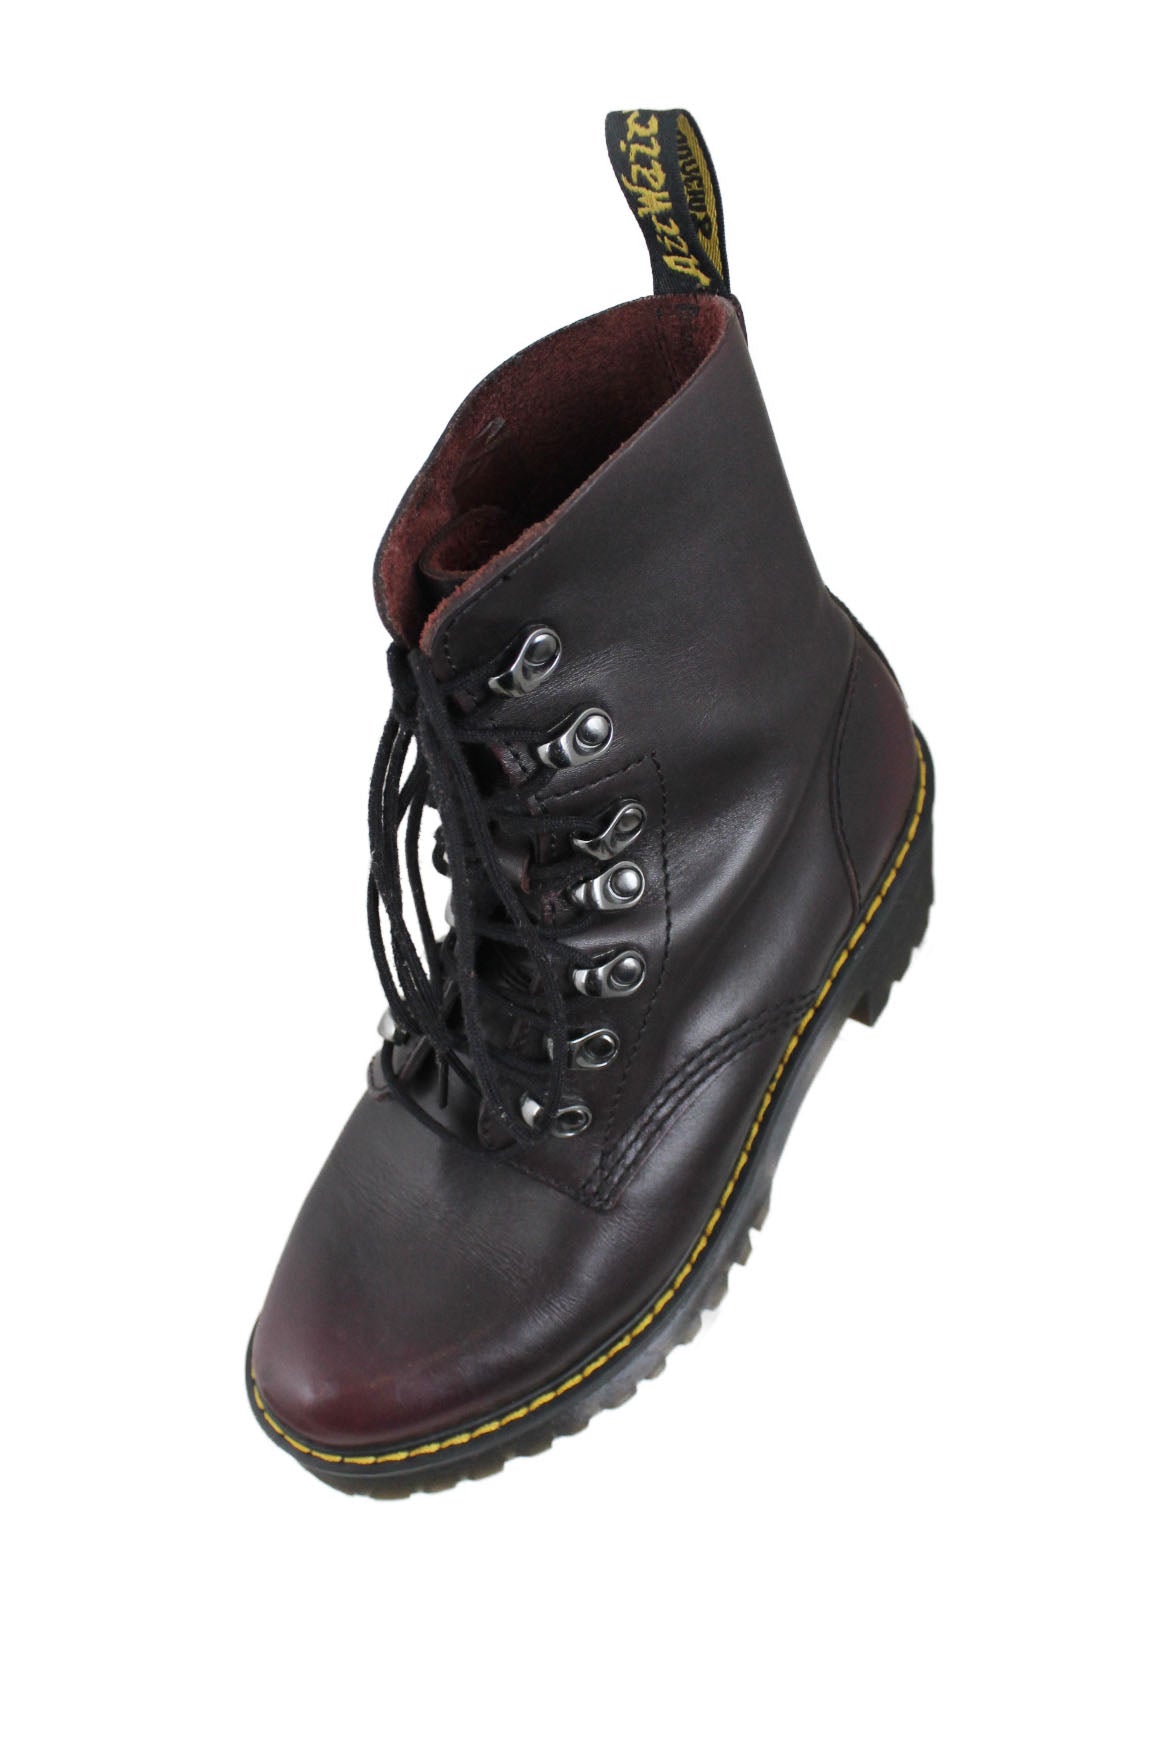 above angle of boots with lace up closure. 